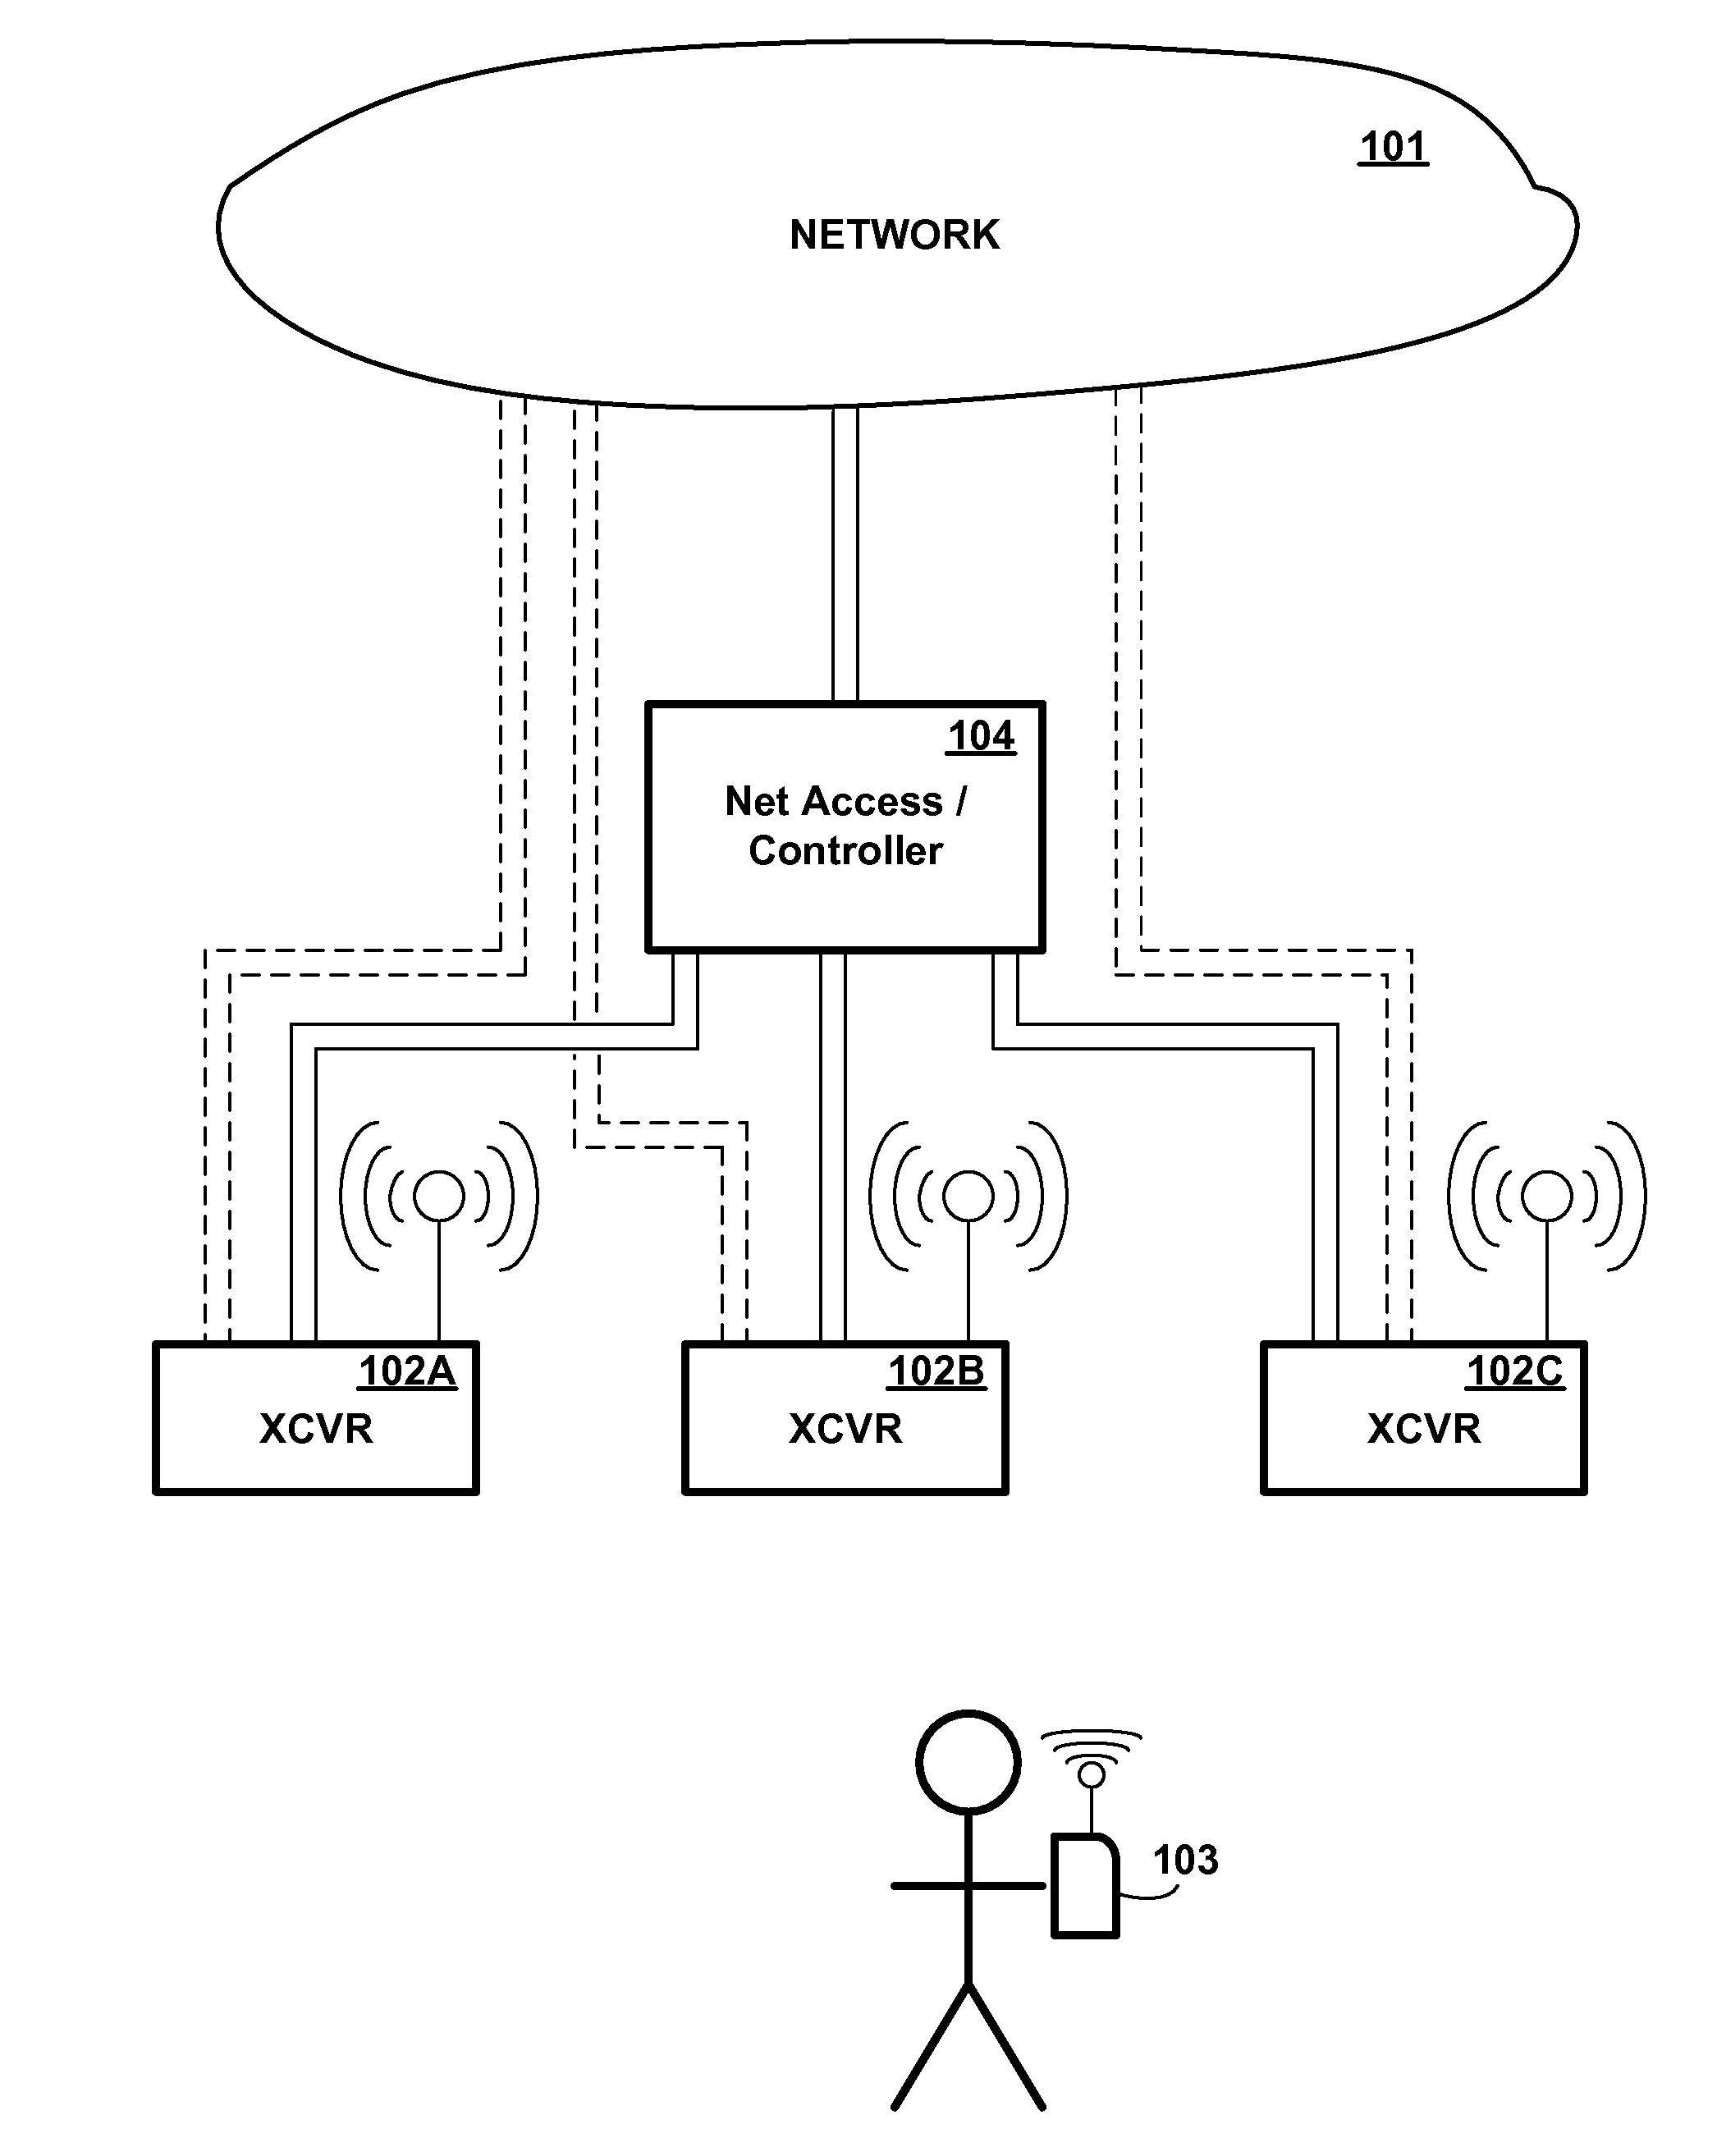 Method and Apparatus for Maintaining Communications Connections Over a Distributed Wireless Network